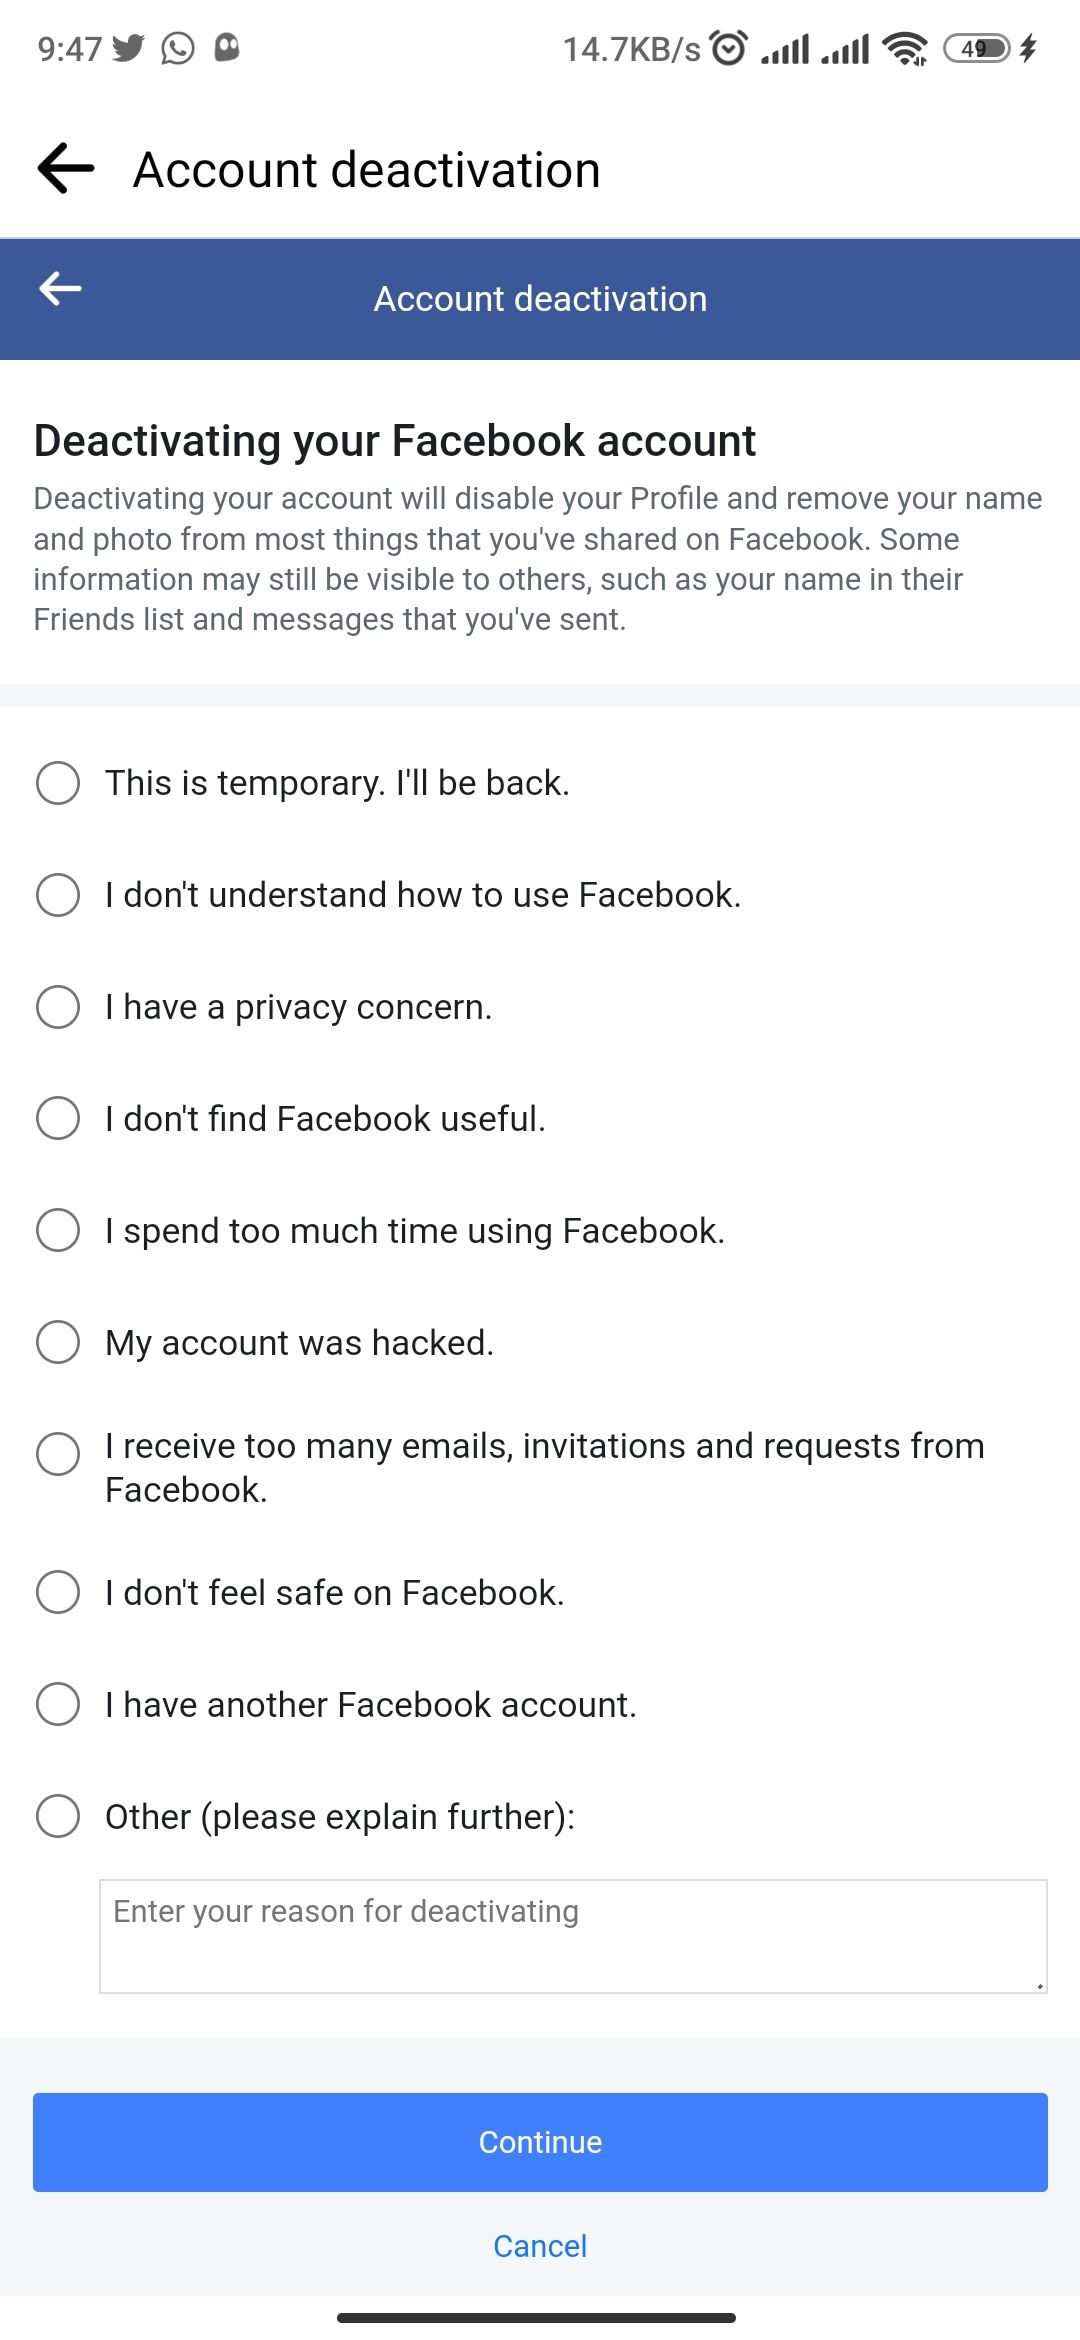 Key reasons for deactivating a Facebook account